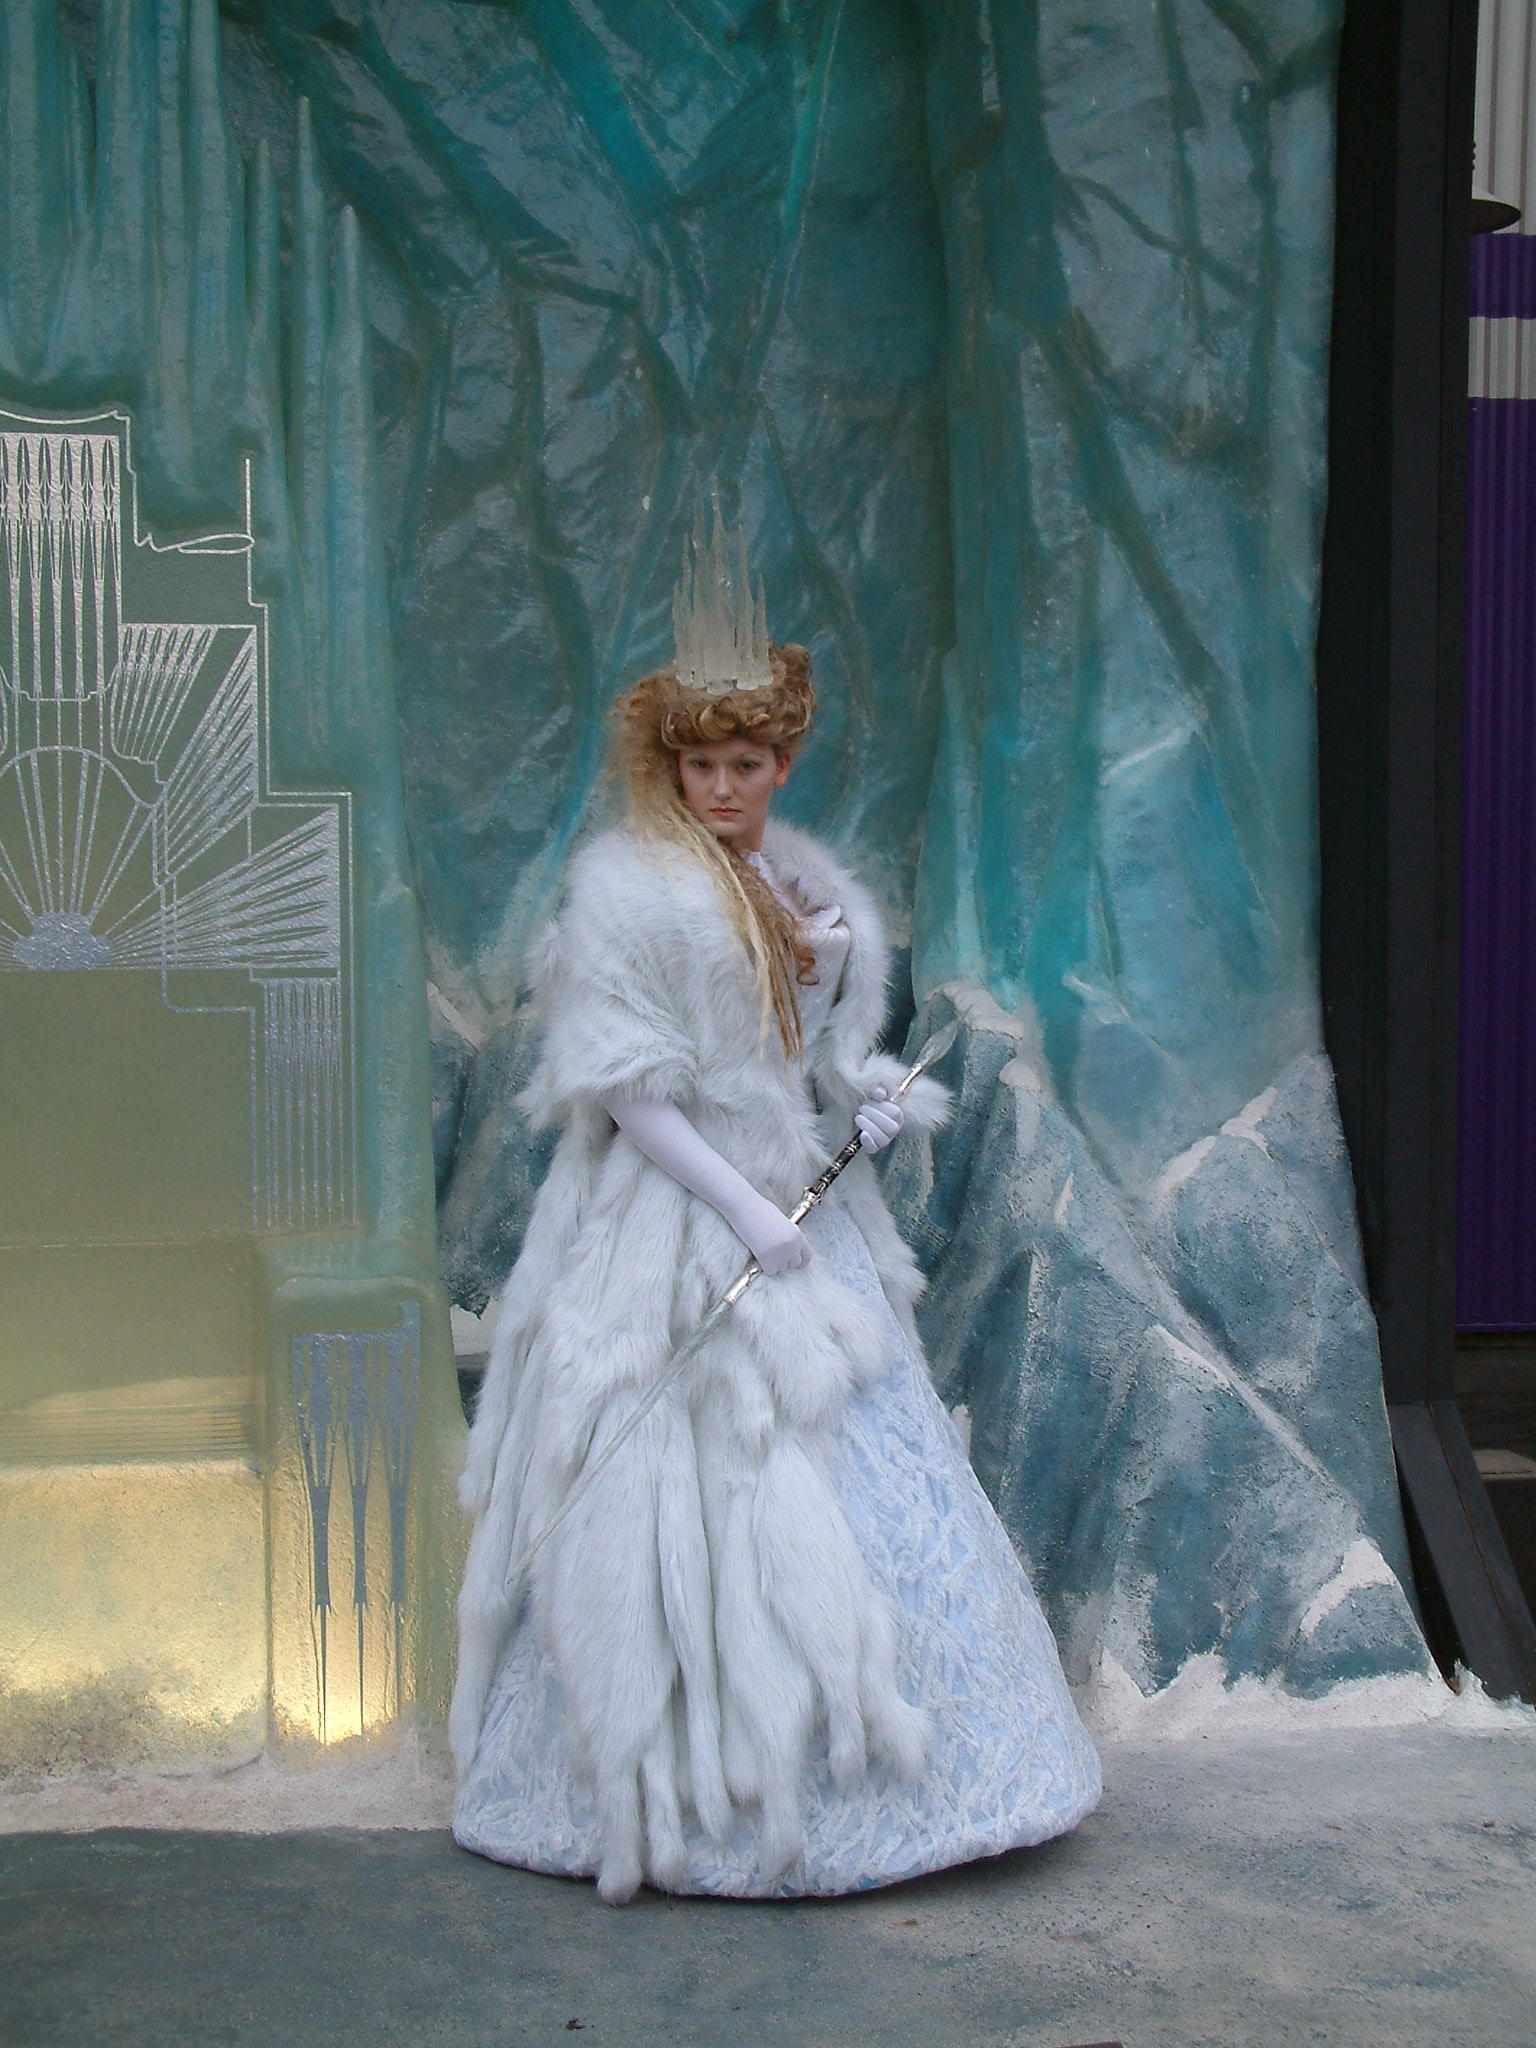 The Queen of Narnia came out for Meet'n'Greets when the first Narnia movie hit the theaters, but after a few months she disappeared. Since then she only came back once for a special event.